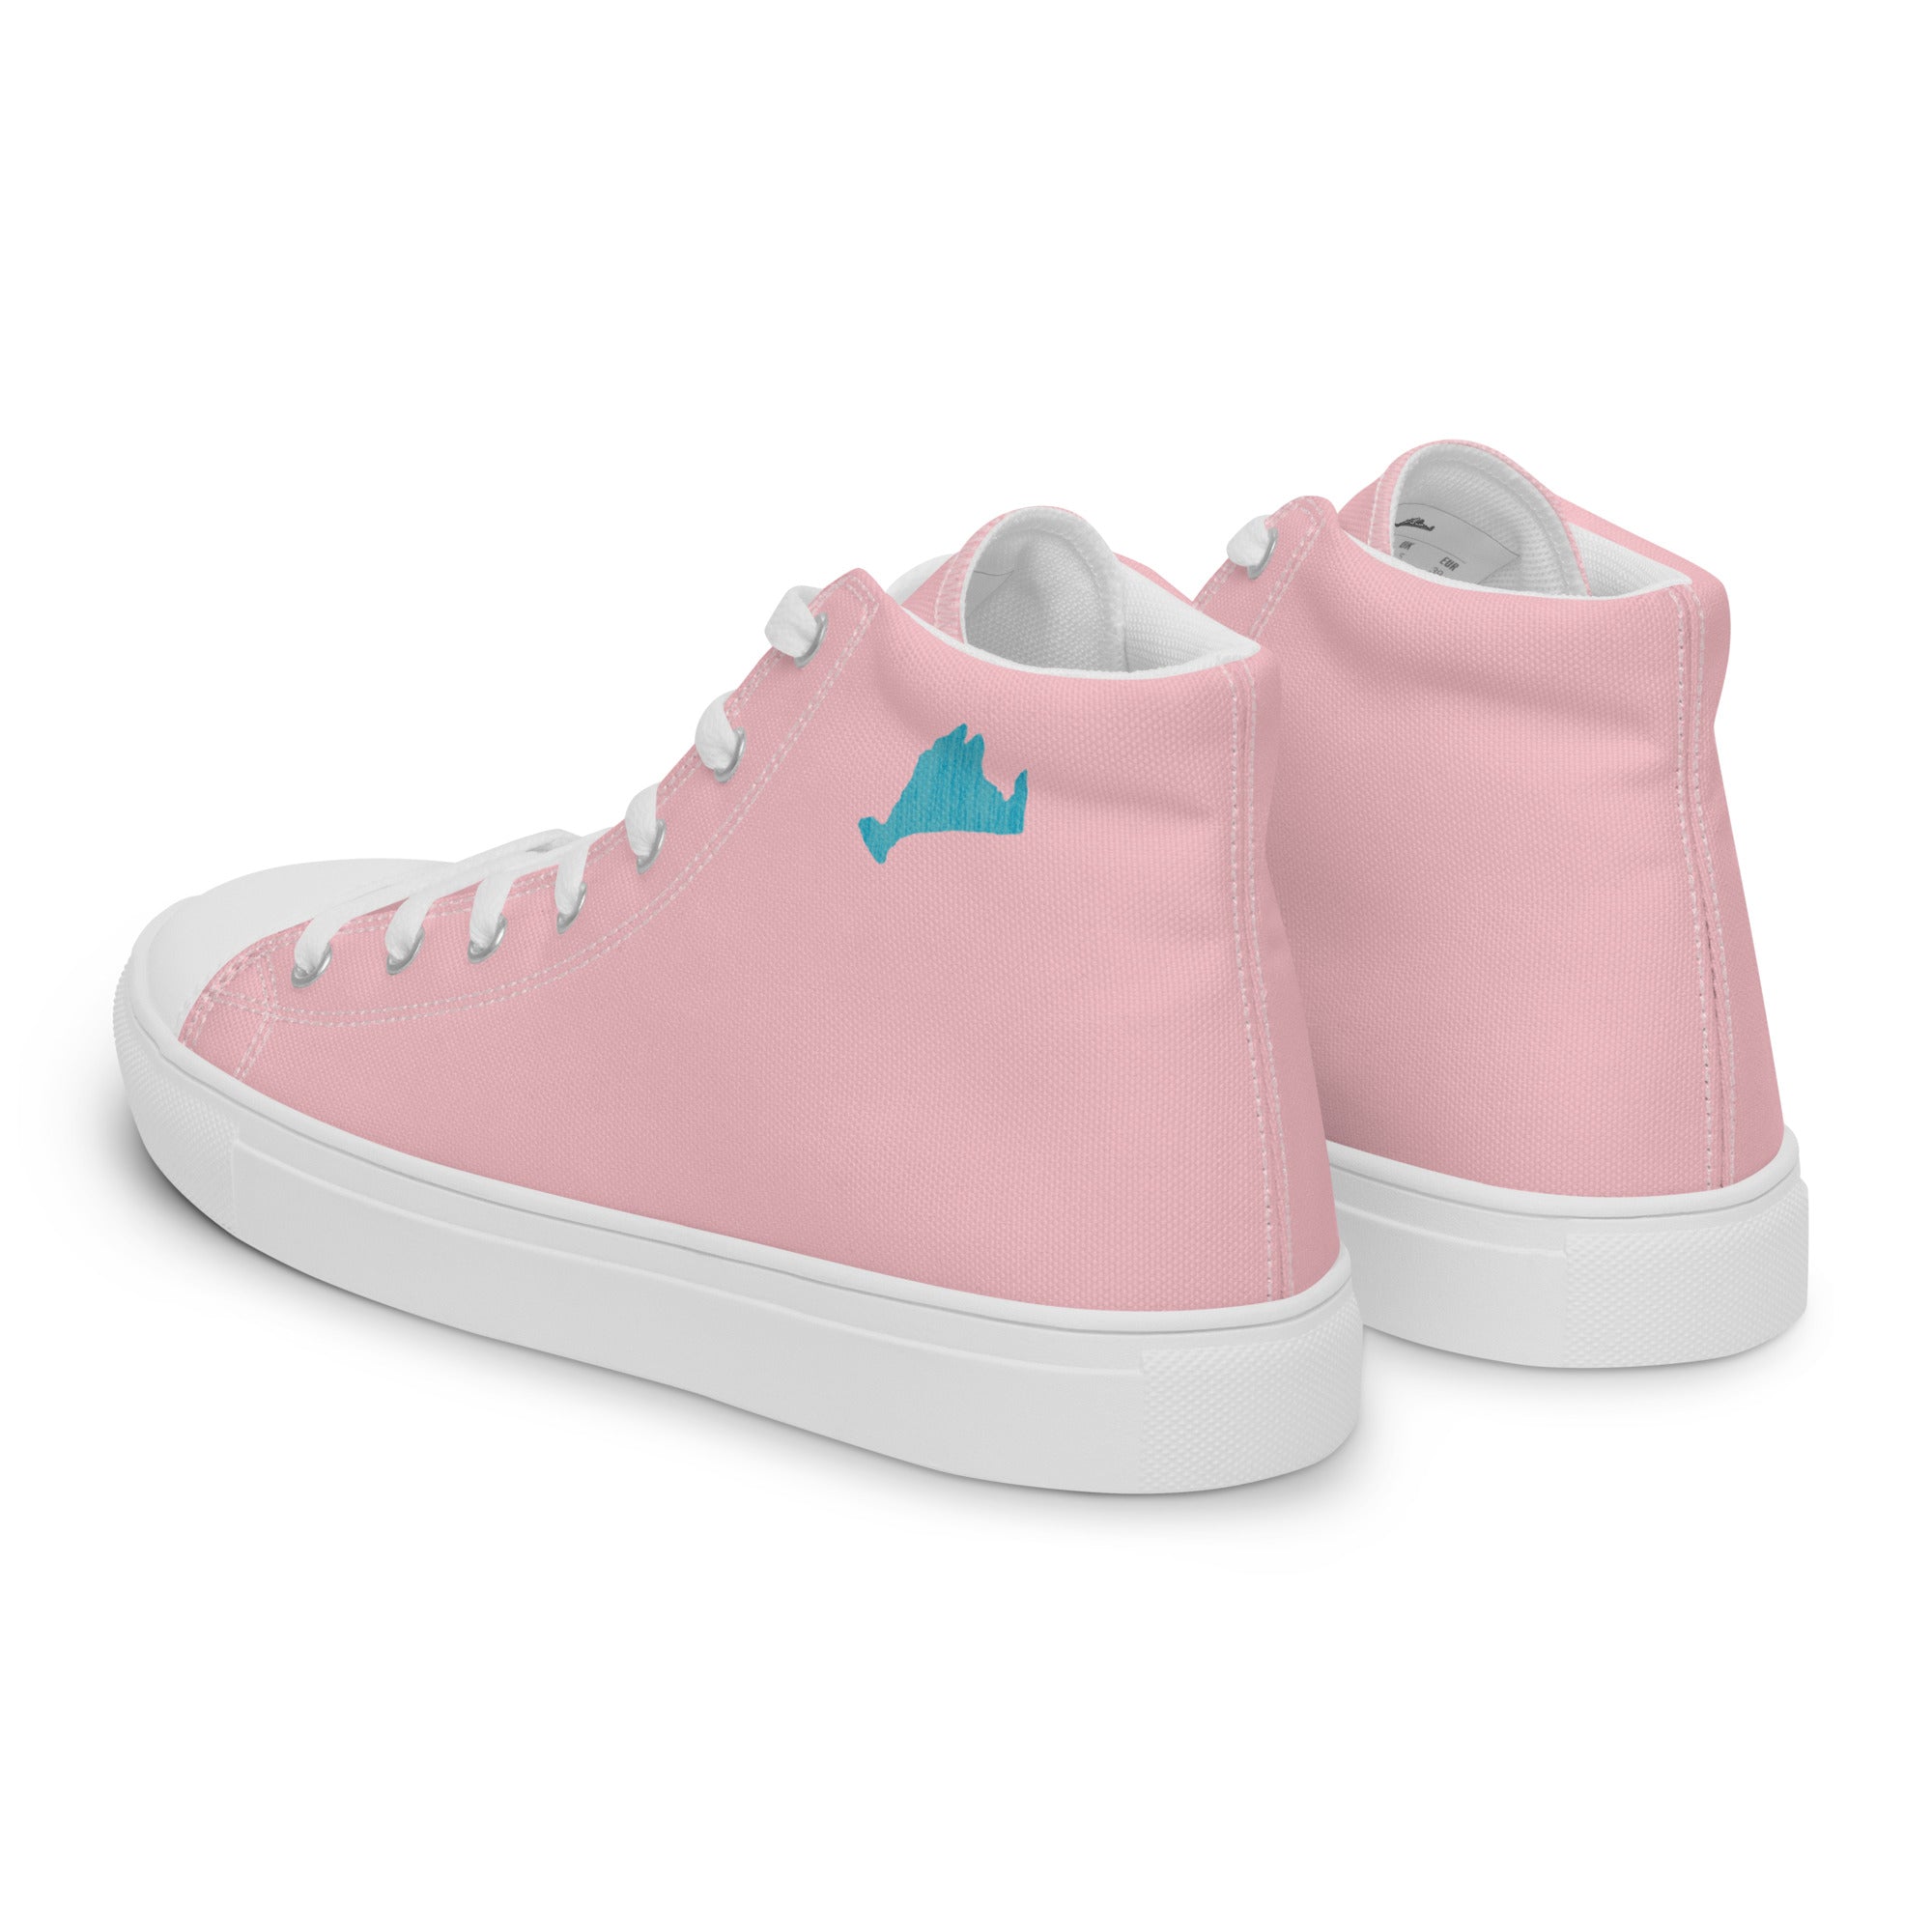 Women’s Pink and Teal High Top Canvas Shoes